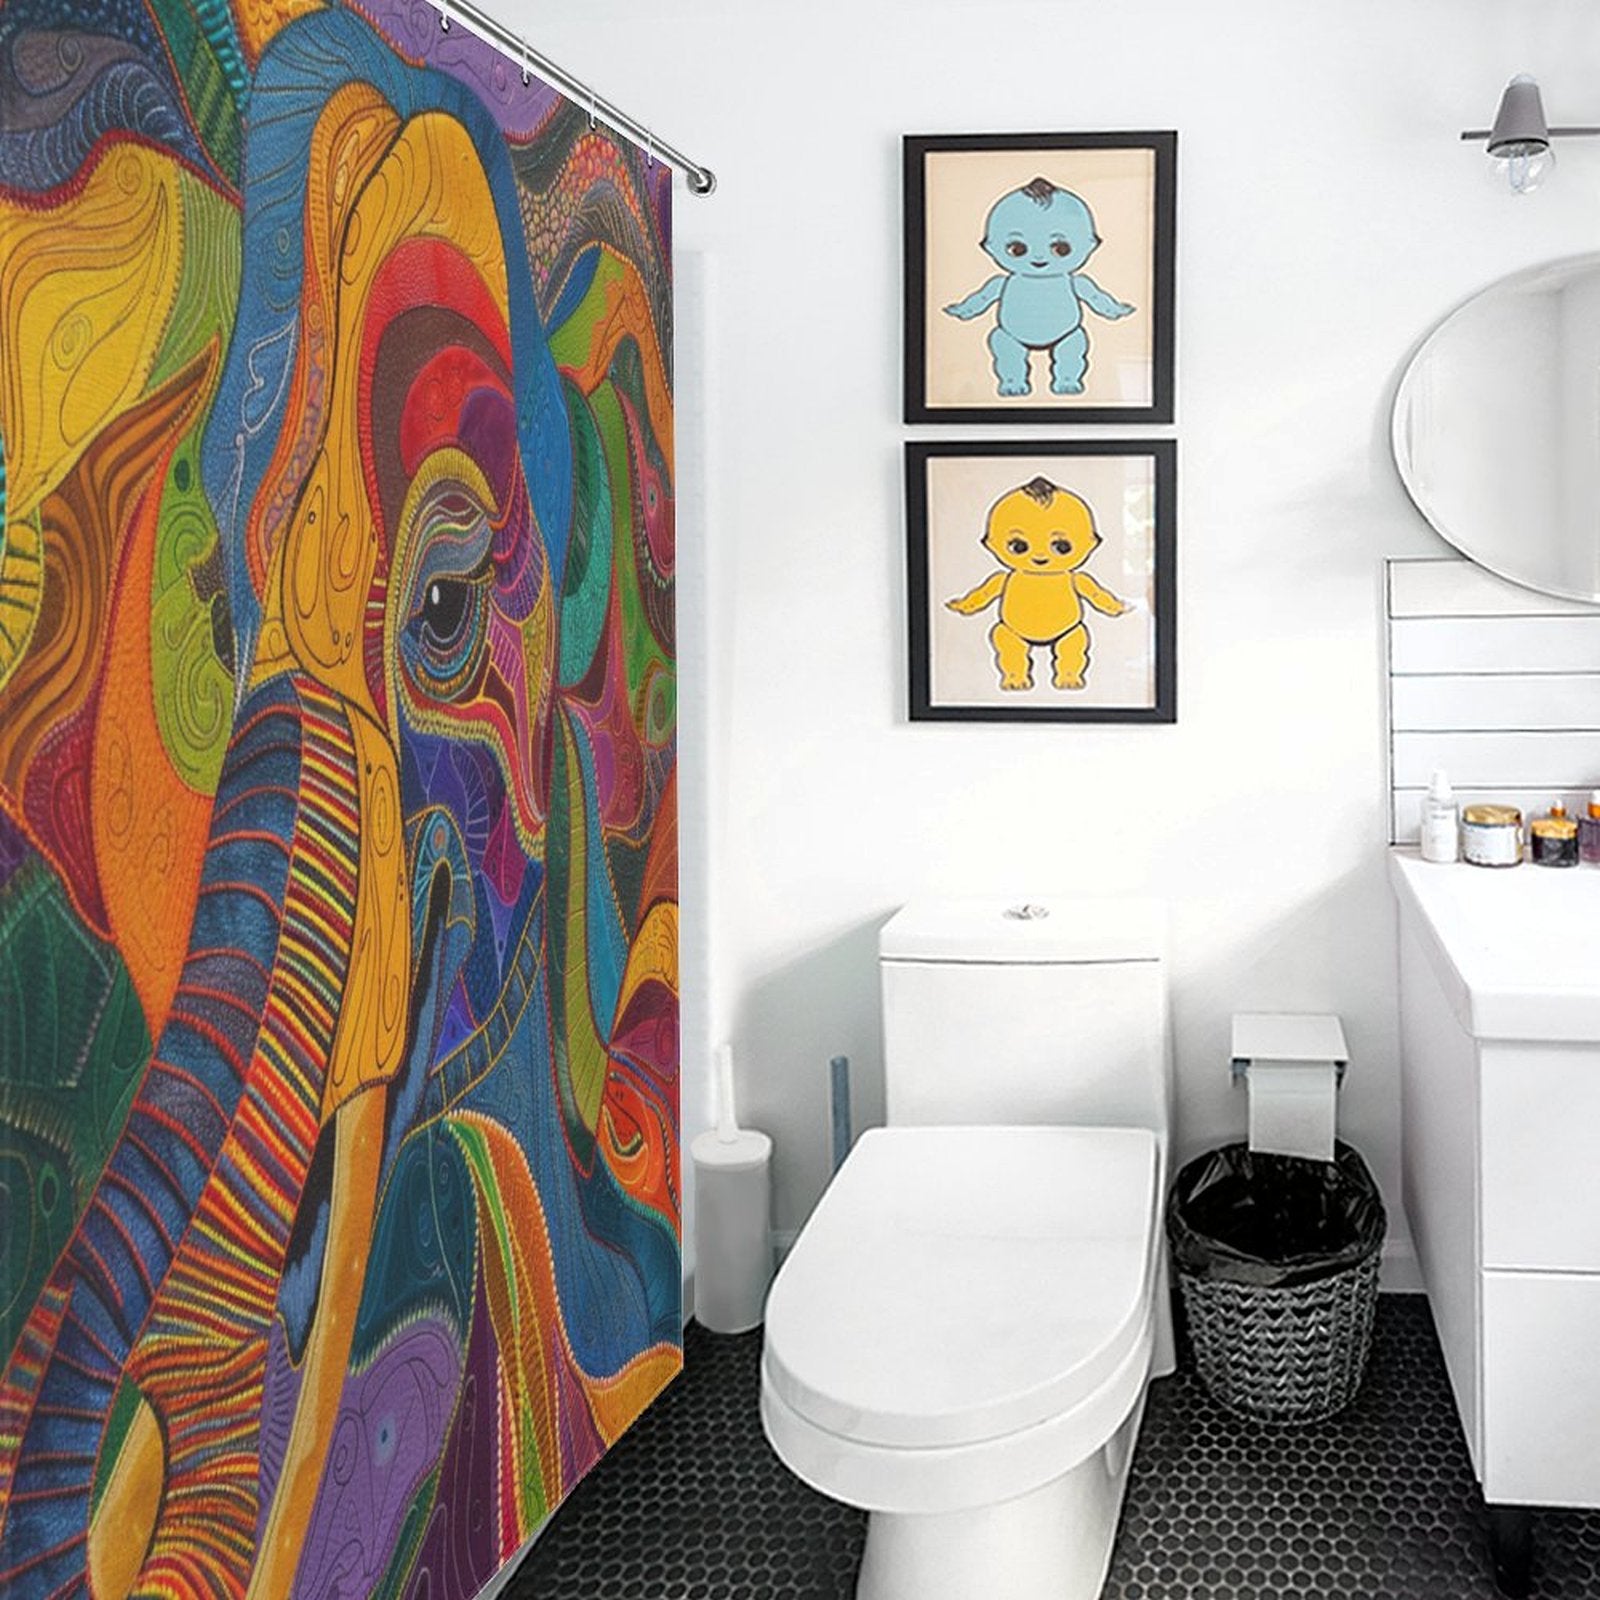 A bathroom featuring a Colorful Abstract Elephant Shower Curtain-Cottoncat by Cotton Cat, two framed baby dinosaur pictures on a white wall, a toilet, a vanity with a round mirror, and a black trash bin on the tiled floor. The vivid colors of the decor bring a playful energy to the space.